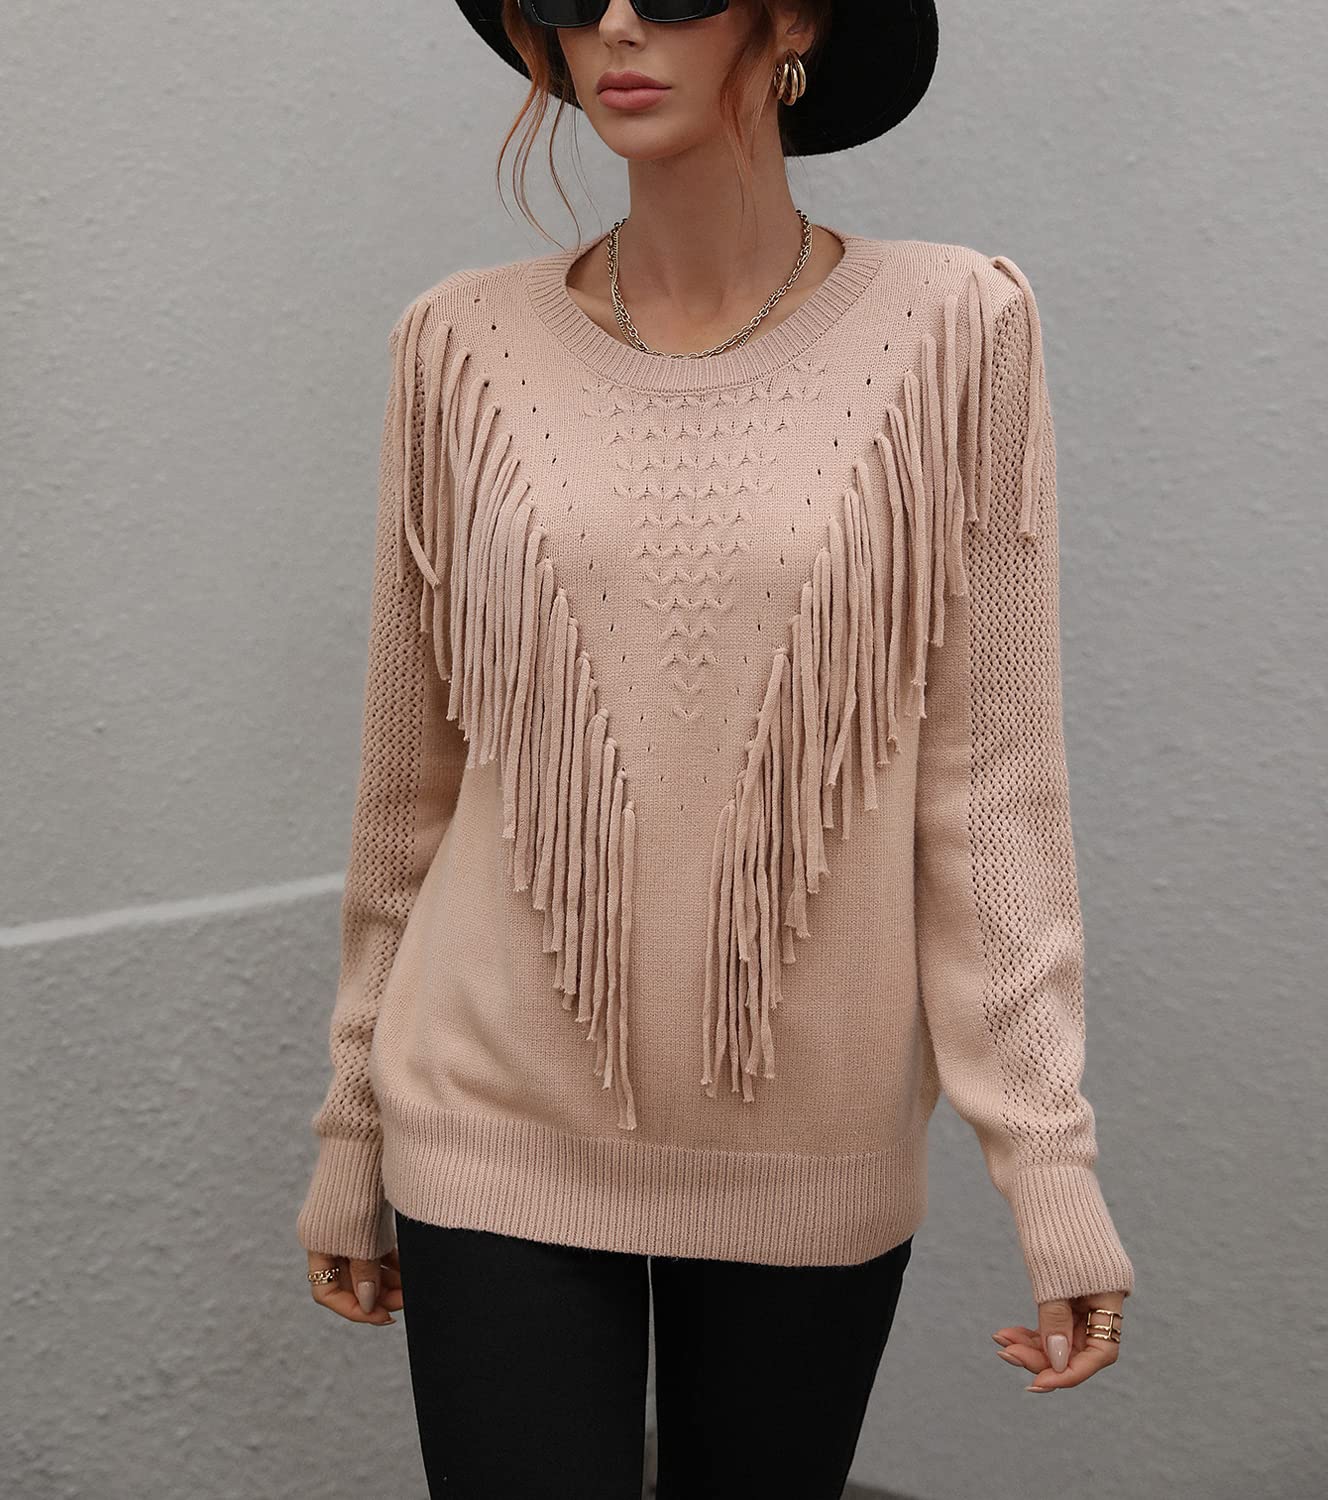 Chouyatou Women's Casual Crewneck Fringe Tassel Knitted Pullover Sweater Jumper Tops